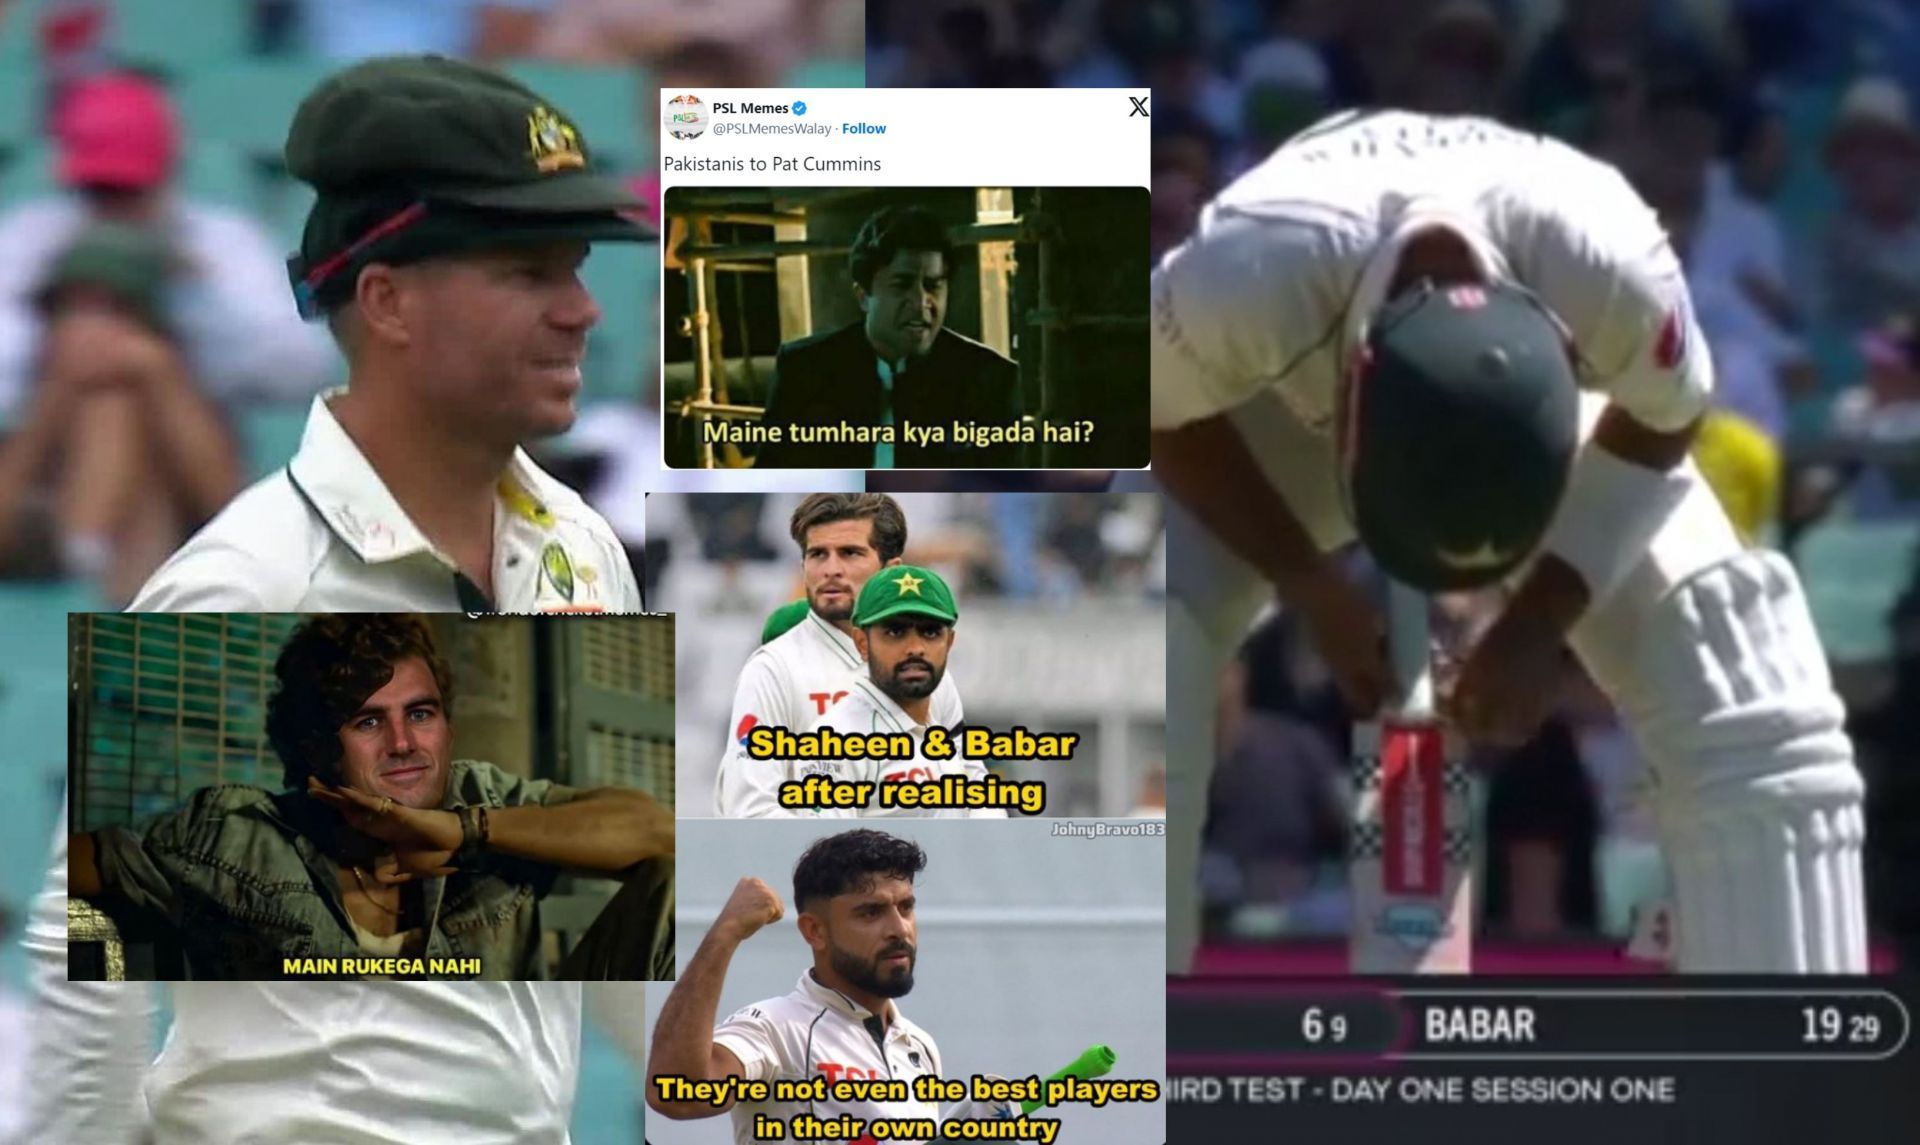 Fans react after Day 1 of the 3rd Test.